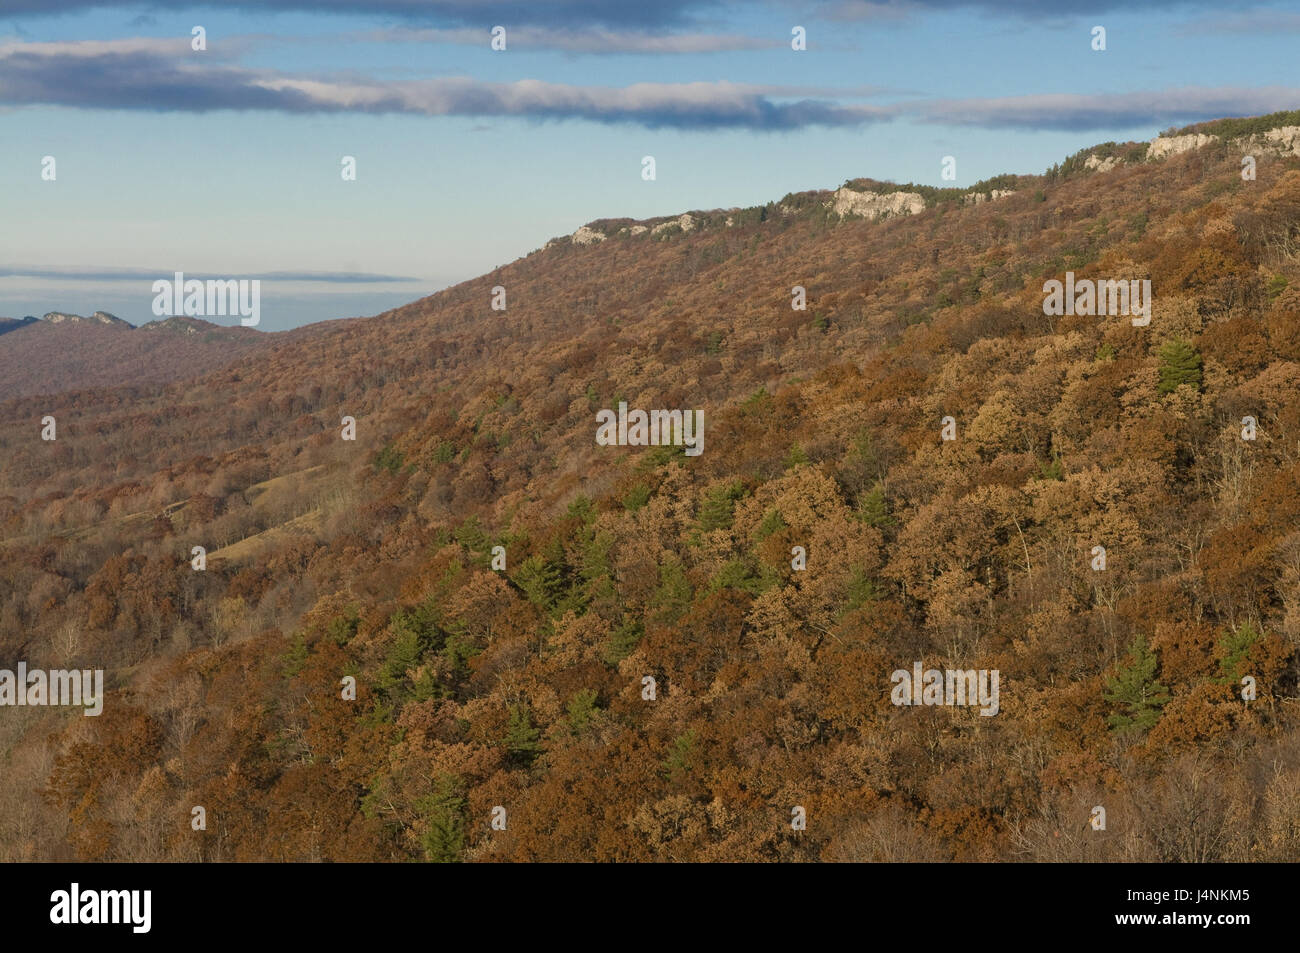 The USA, West Virginia, Allegheny Mountains, scenery, view, Stock Photo